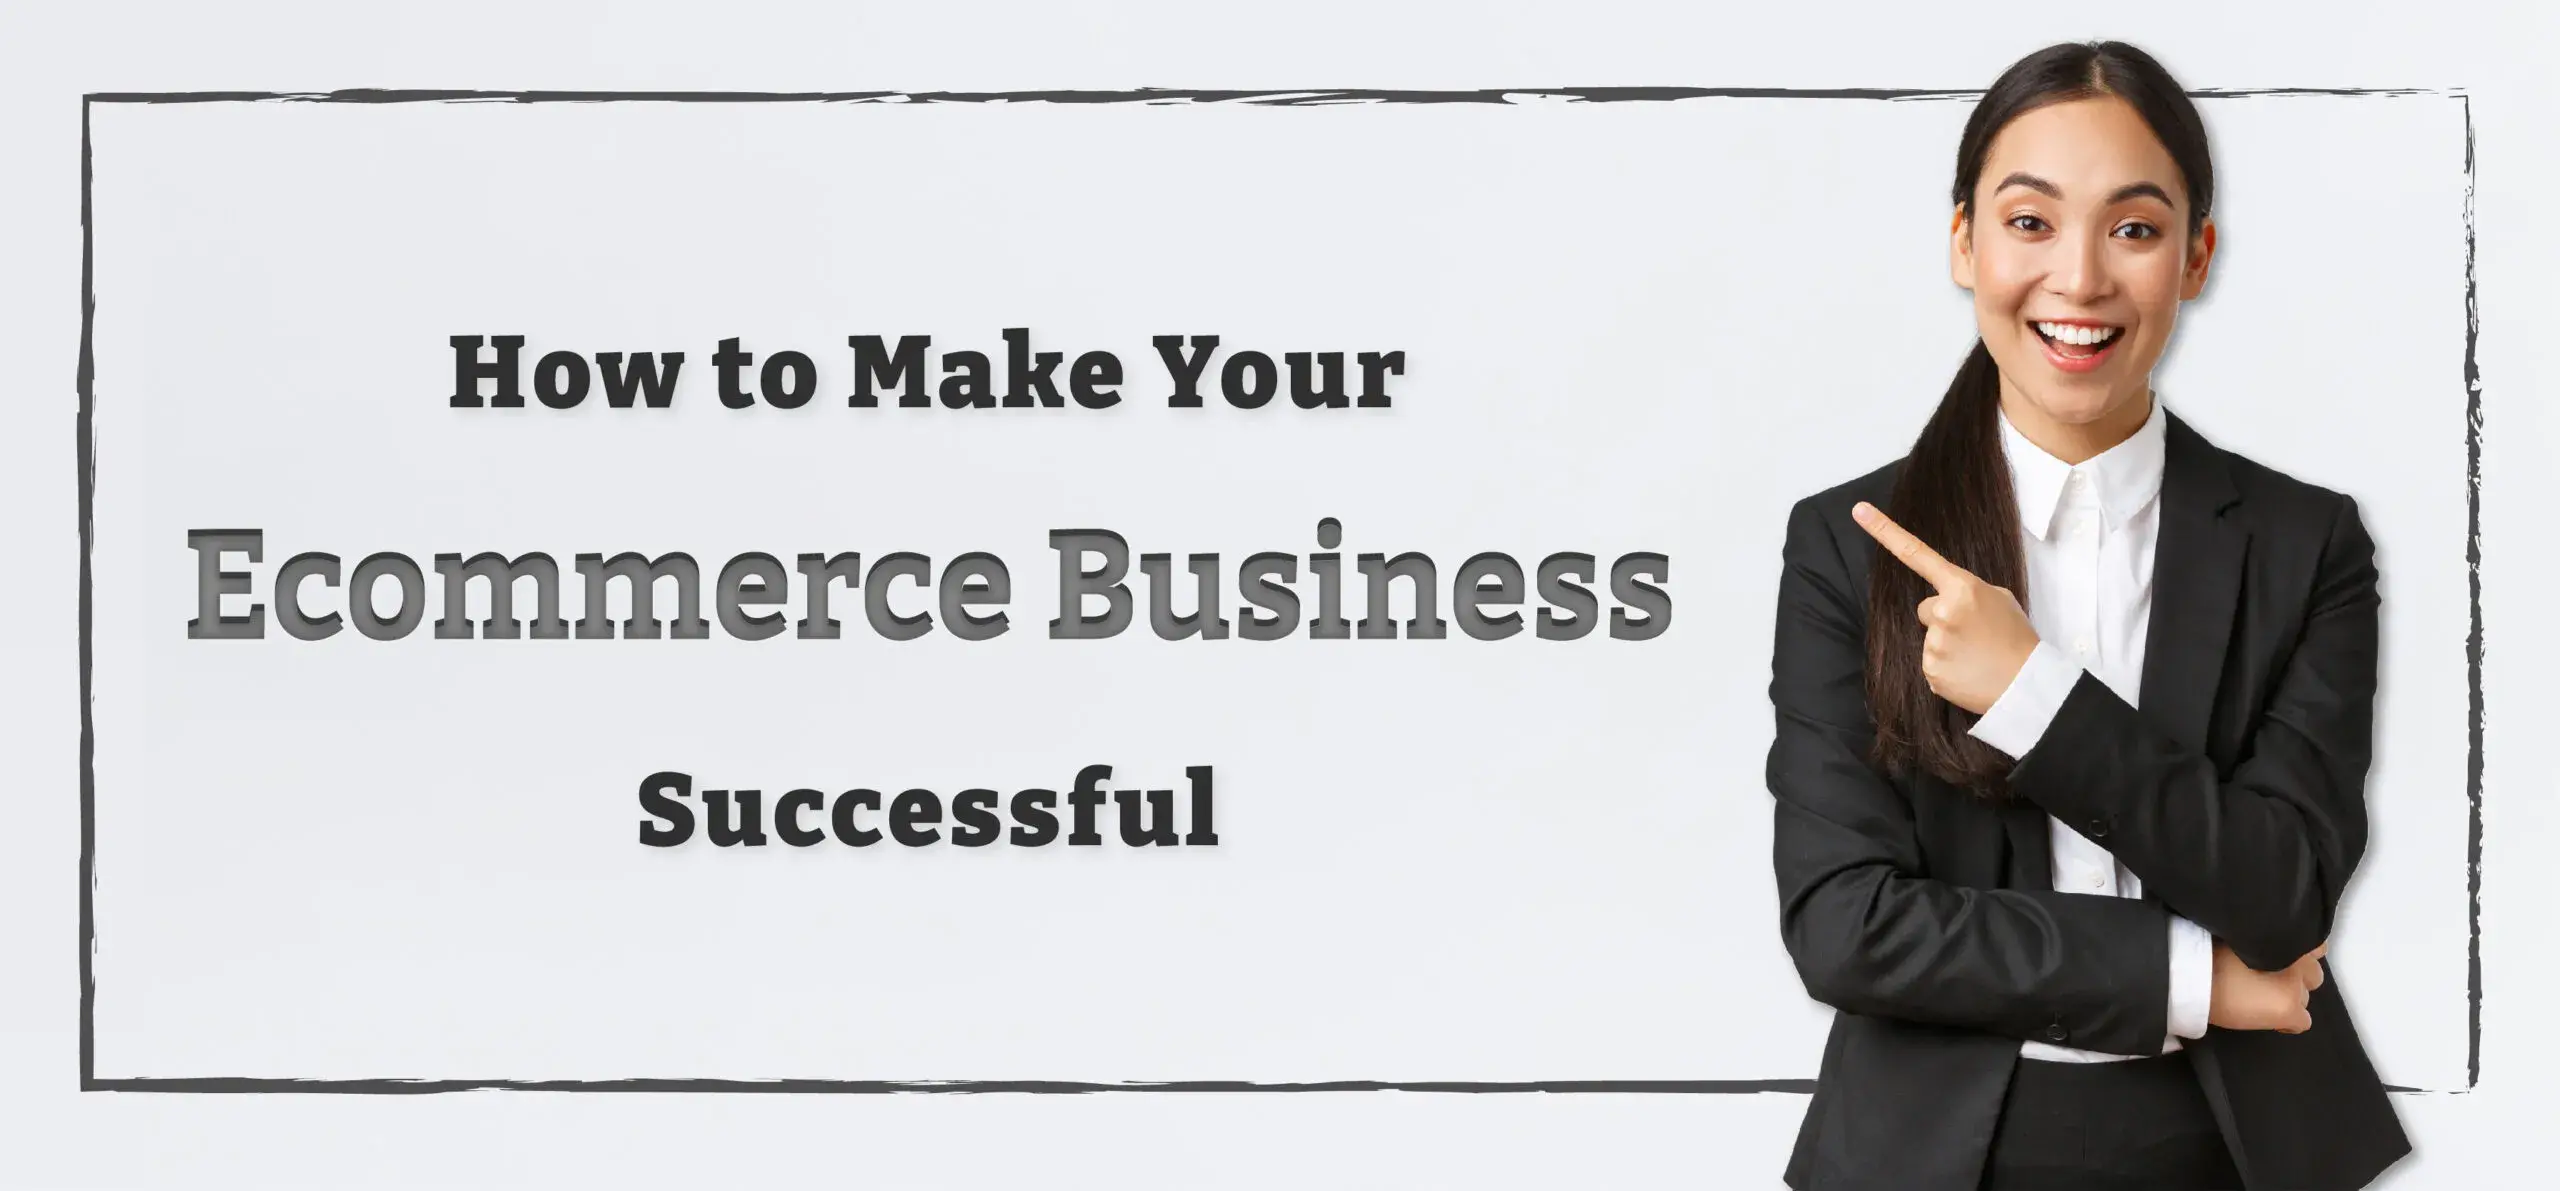 10 Tips on How to Make Your Ecommerce Business Successful